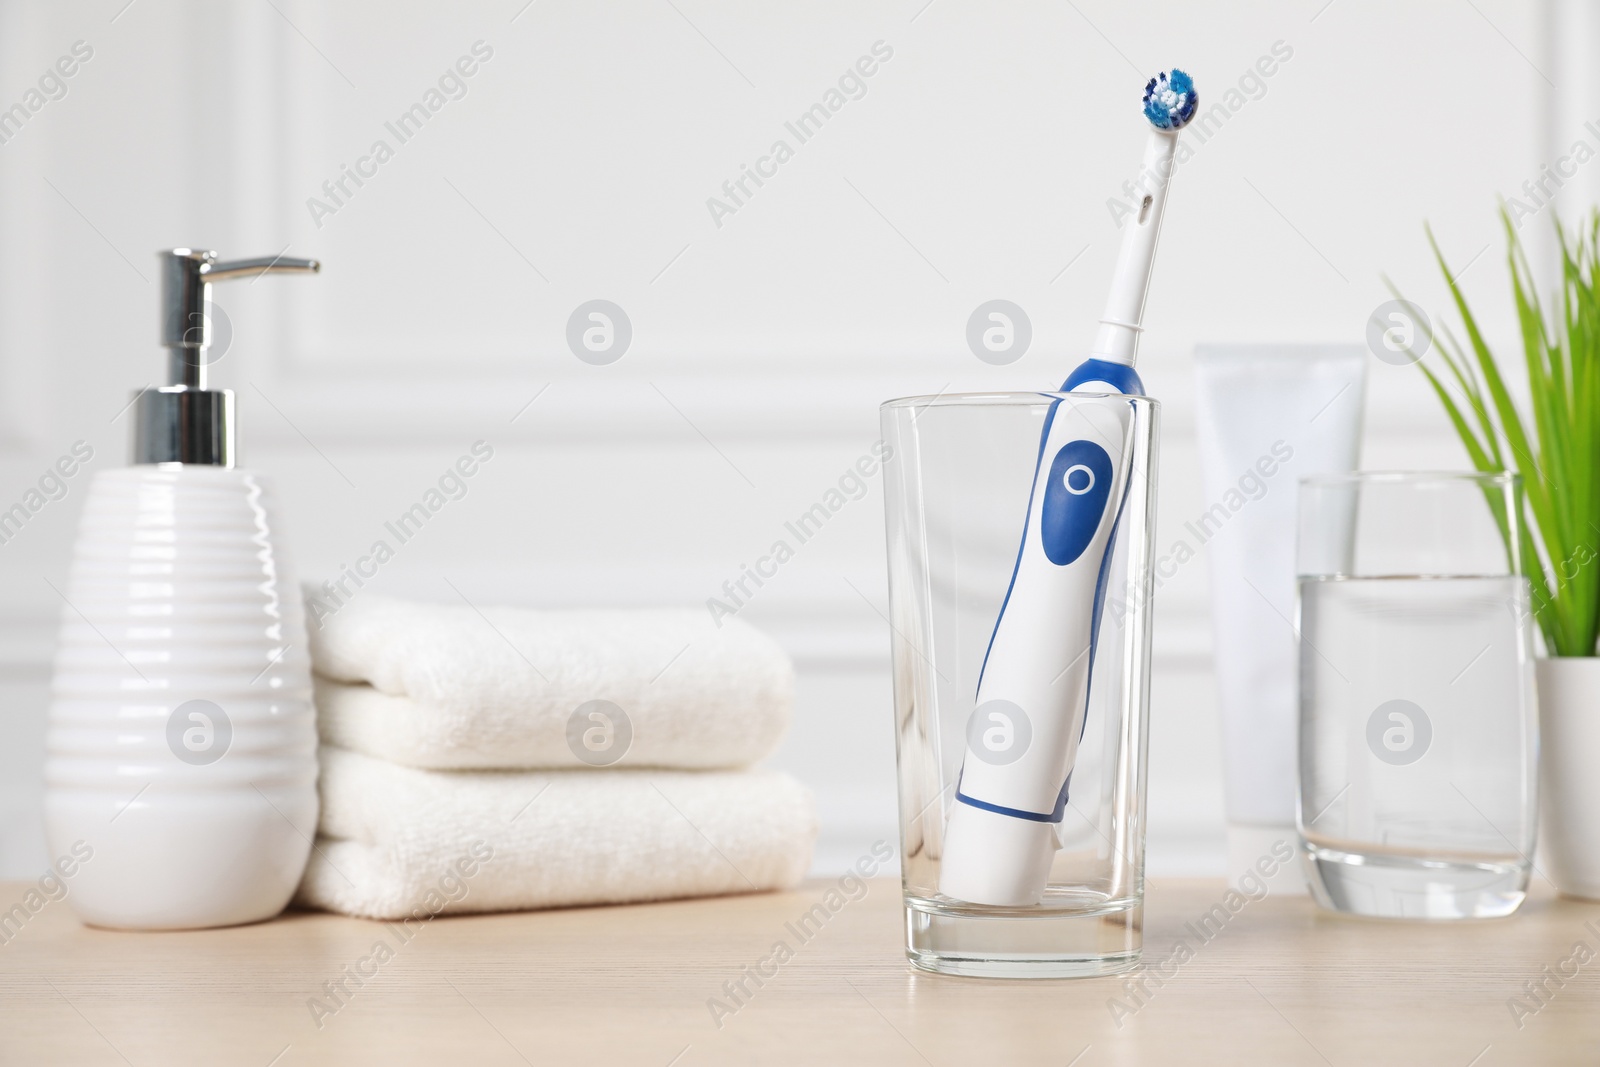 Photo of Electric toothbrush, glass of water and toiletries on wooden table